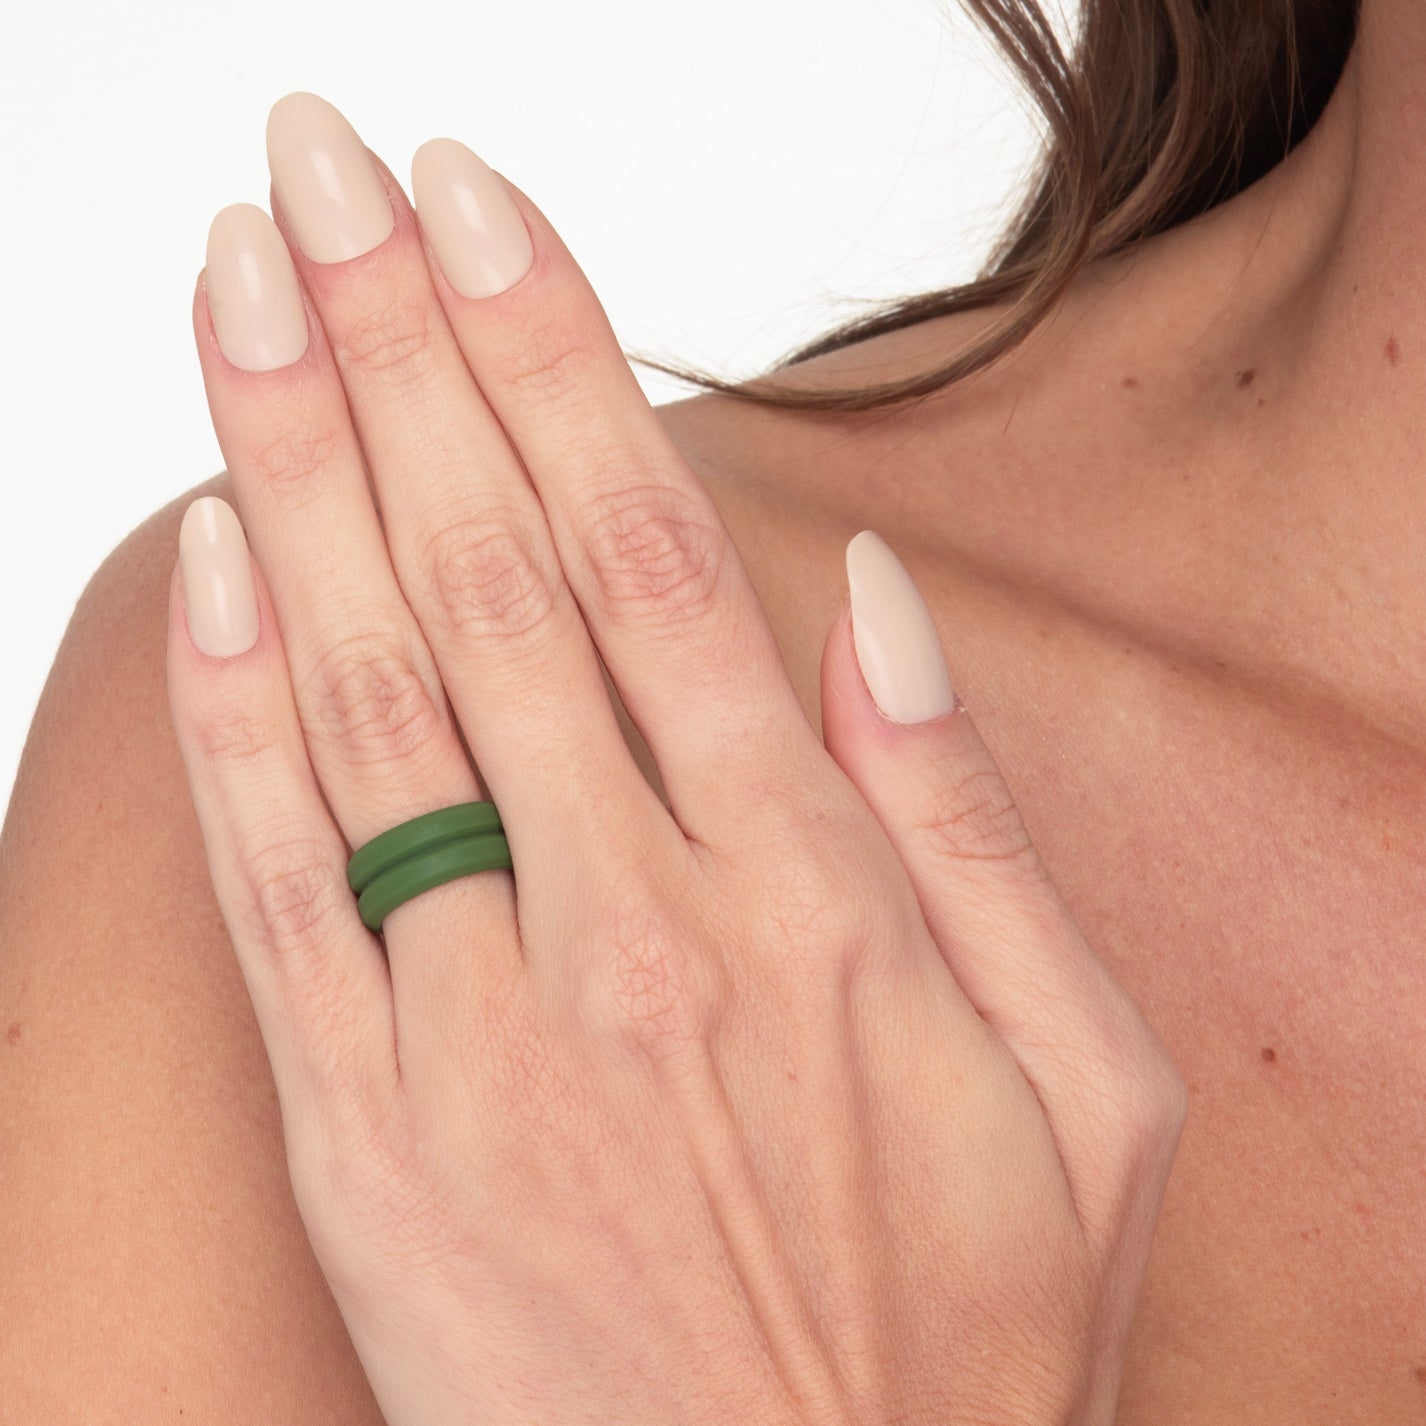 The Pine - Silicone Ring